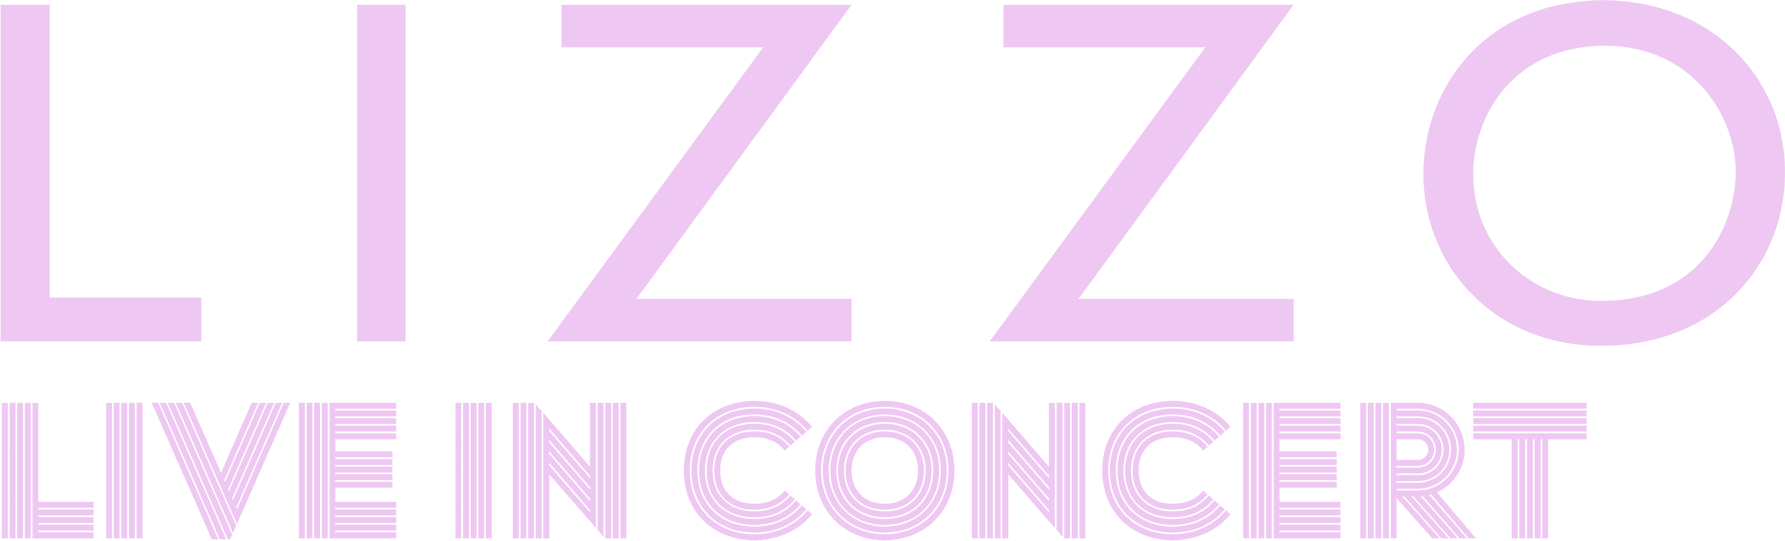 Lizzo: Live in Concert logo